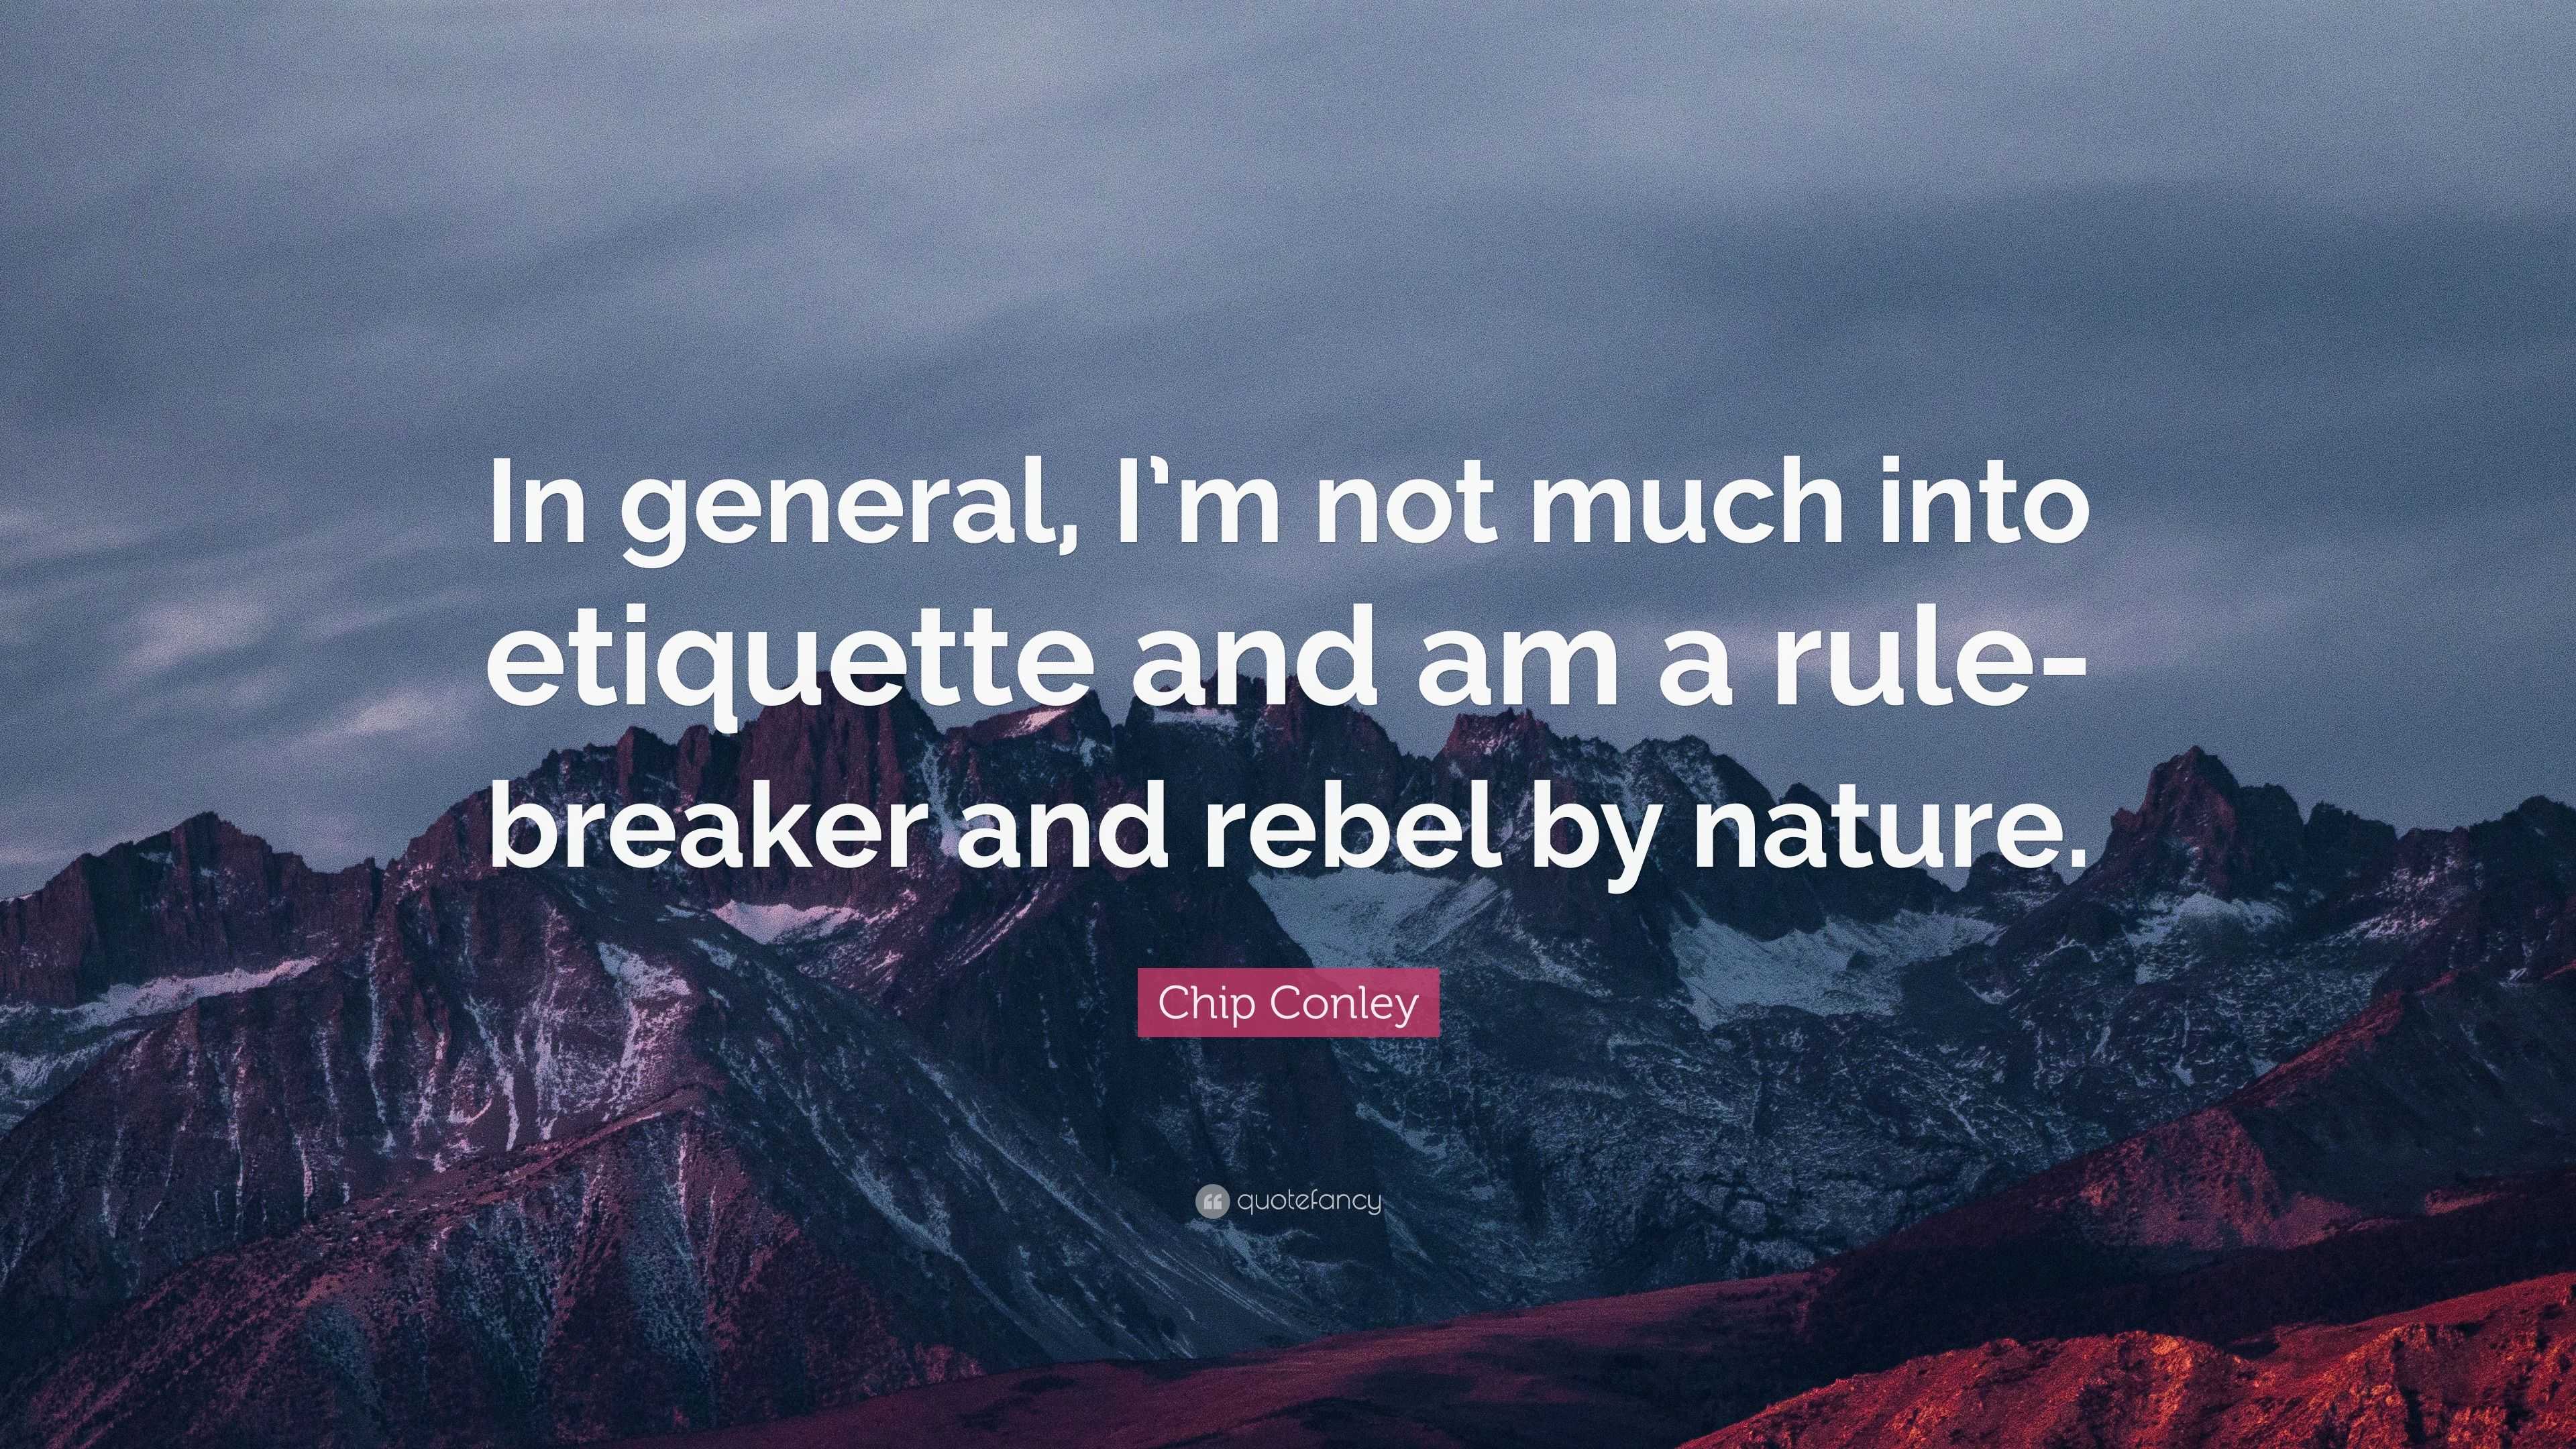 Quote: “In general, I'm not much into etiquette and am a rule-breaker